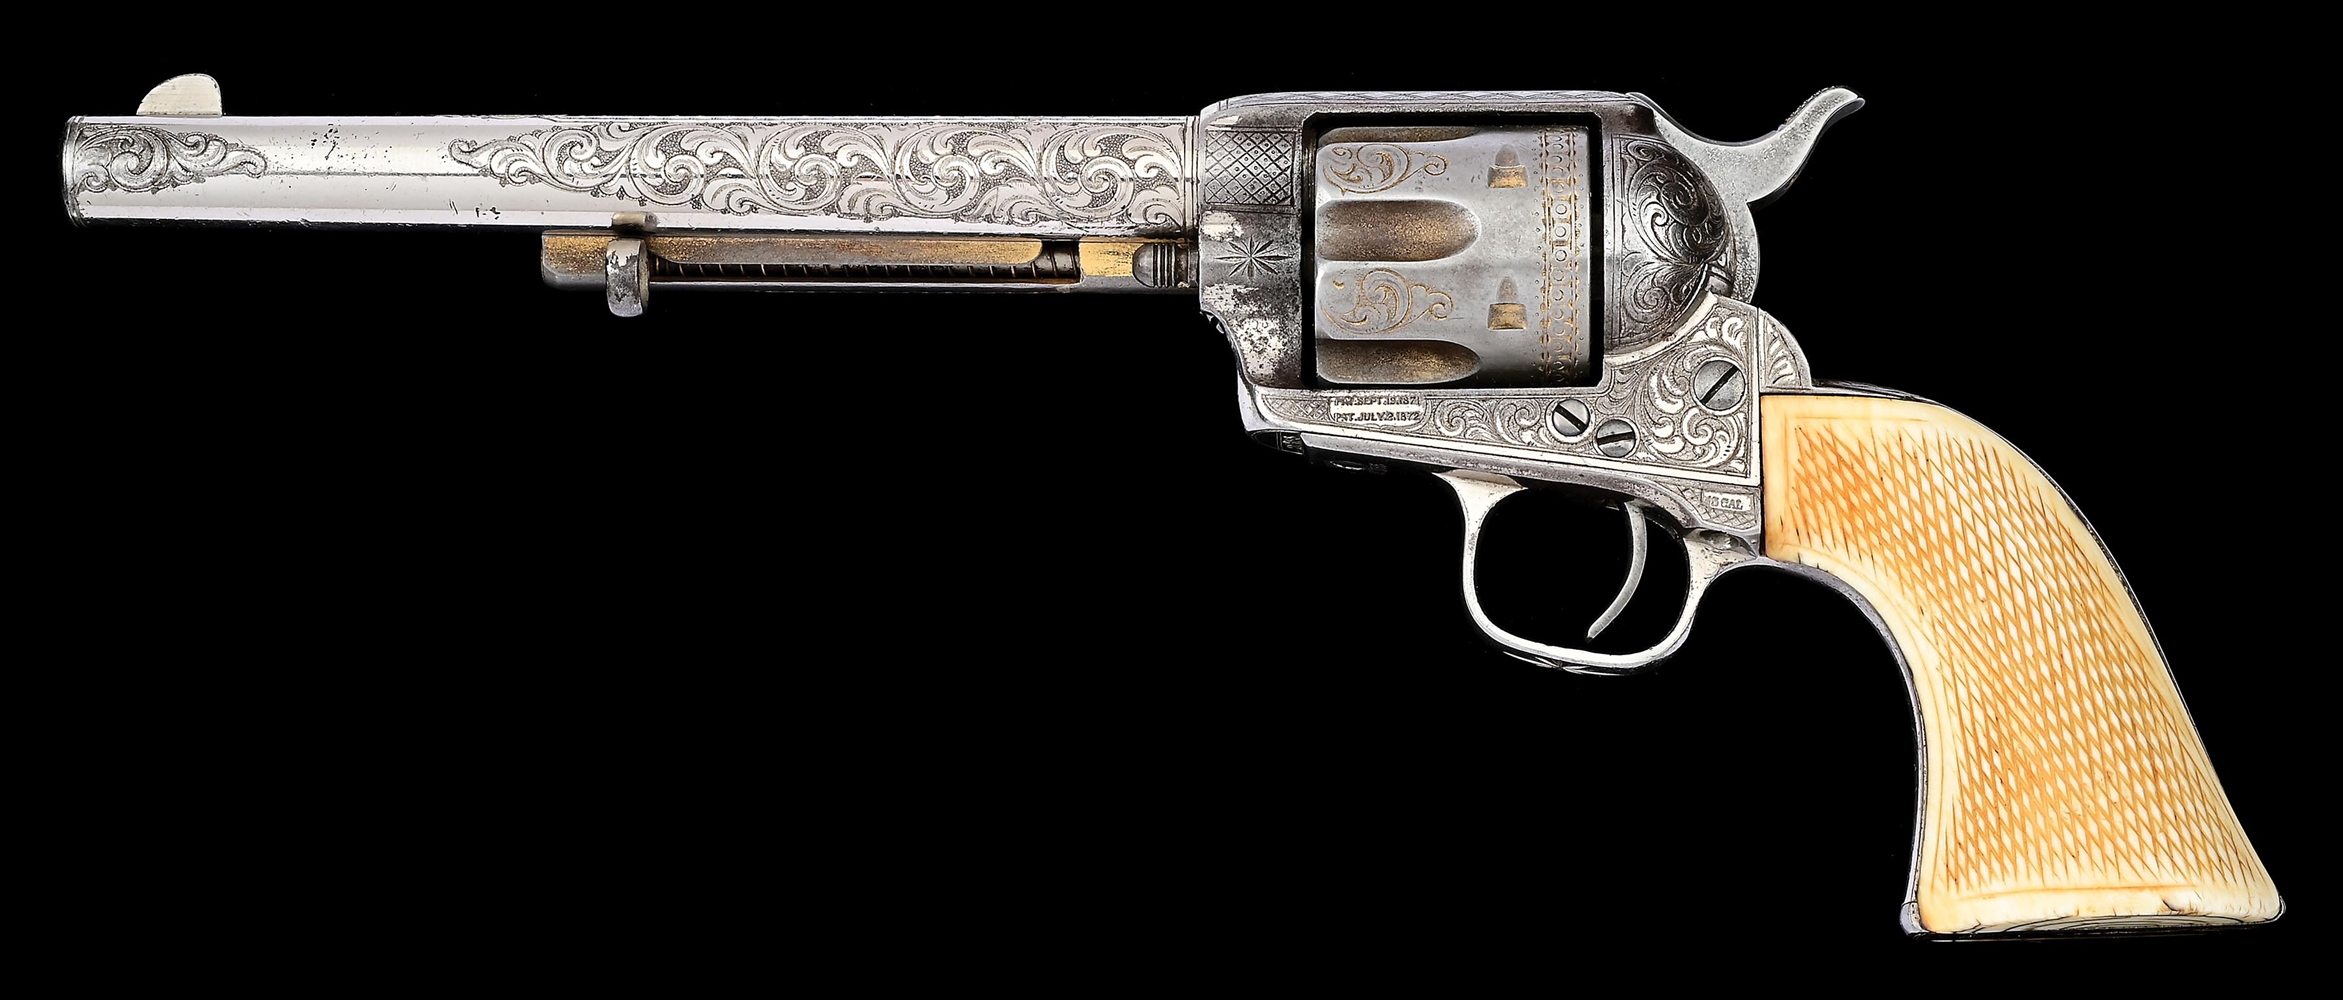 (A) MASTER ENGRAVED ENGRAVED, NICKEL & GOLD PLATED, COLT SINGLE ACTION ARMY REVOLVER WITH IVORY GRIPS, FACTORY LETTER, & RESEARCH (1875).